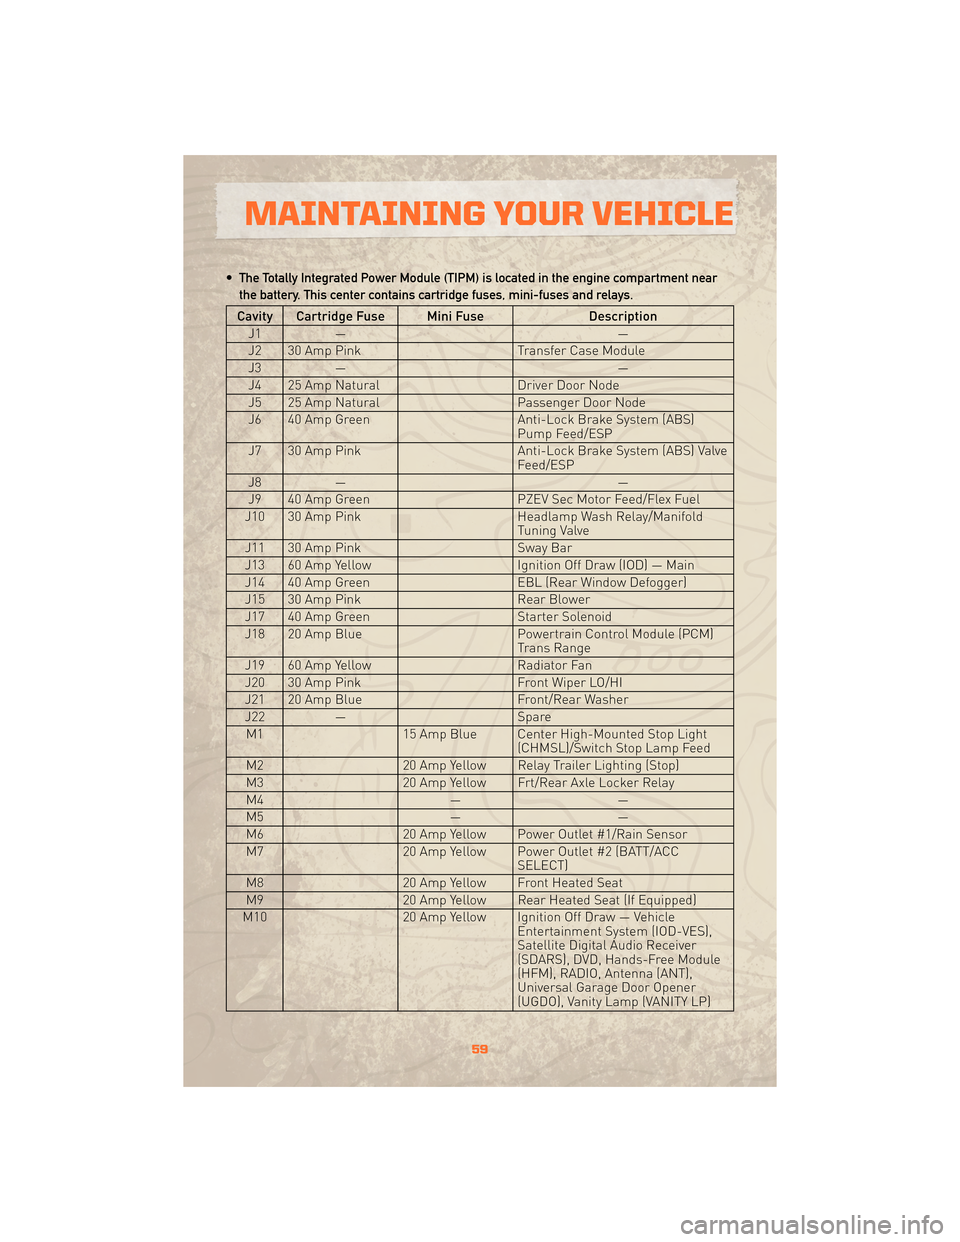 JEEP WRANGLER 2010 JK / 3.G User Guide • The Totally Integrated Power Module (TIPM) is located in the engine compartment nearthe battery. This center contains cartridge fuses, mini-fuses and relays.
Cavity Cartridge Fuse Mini Fuse Descri